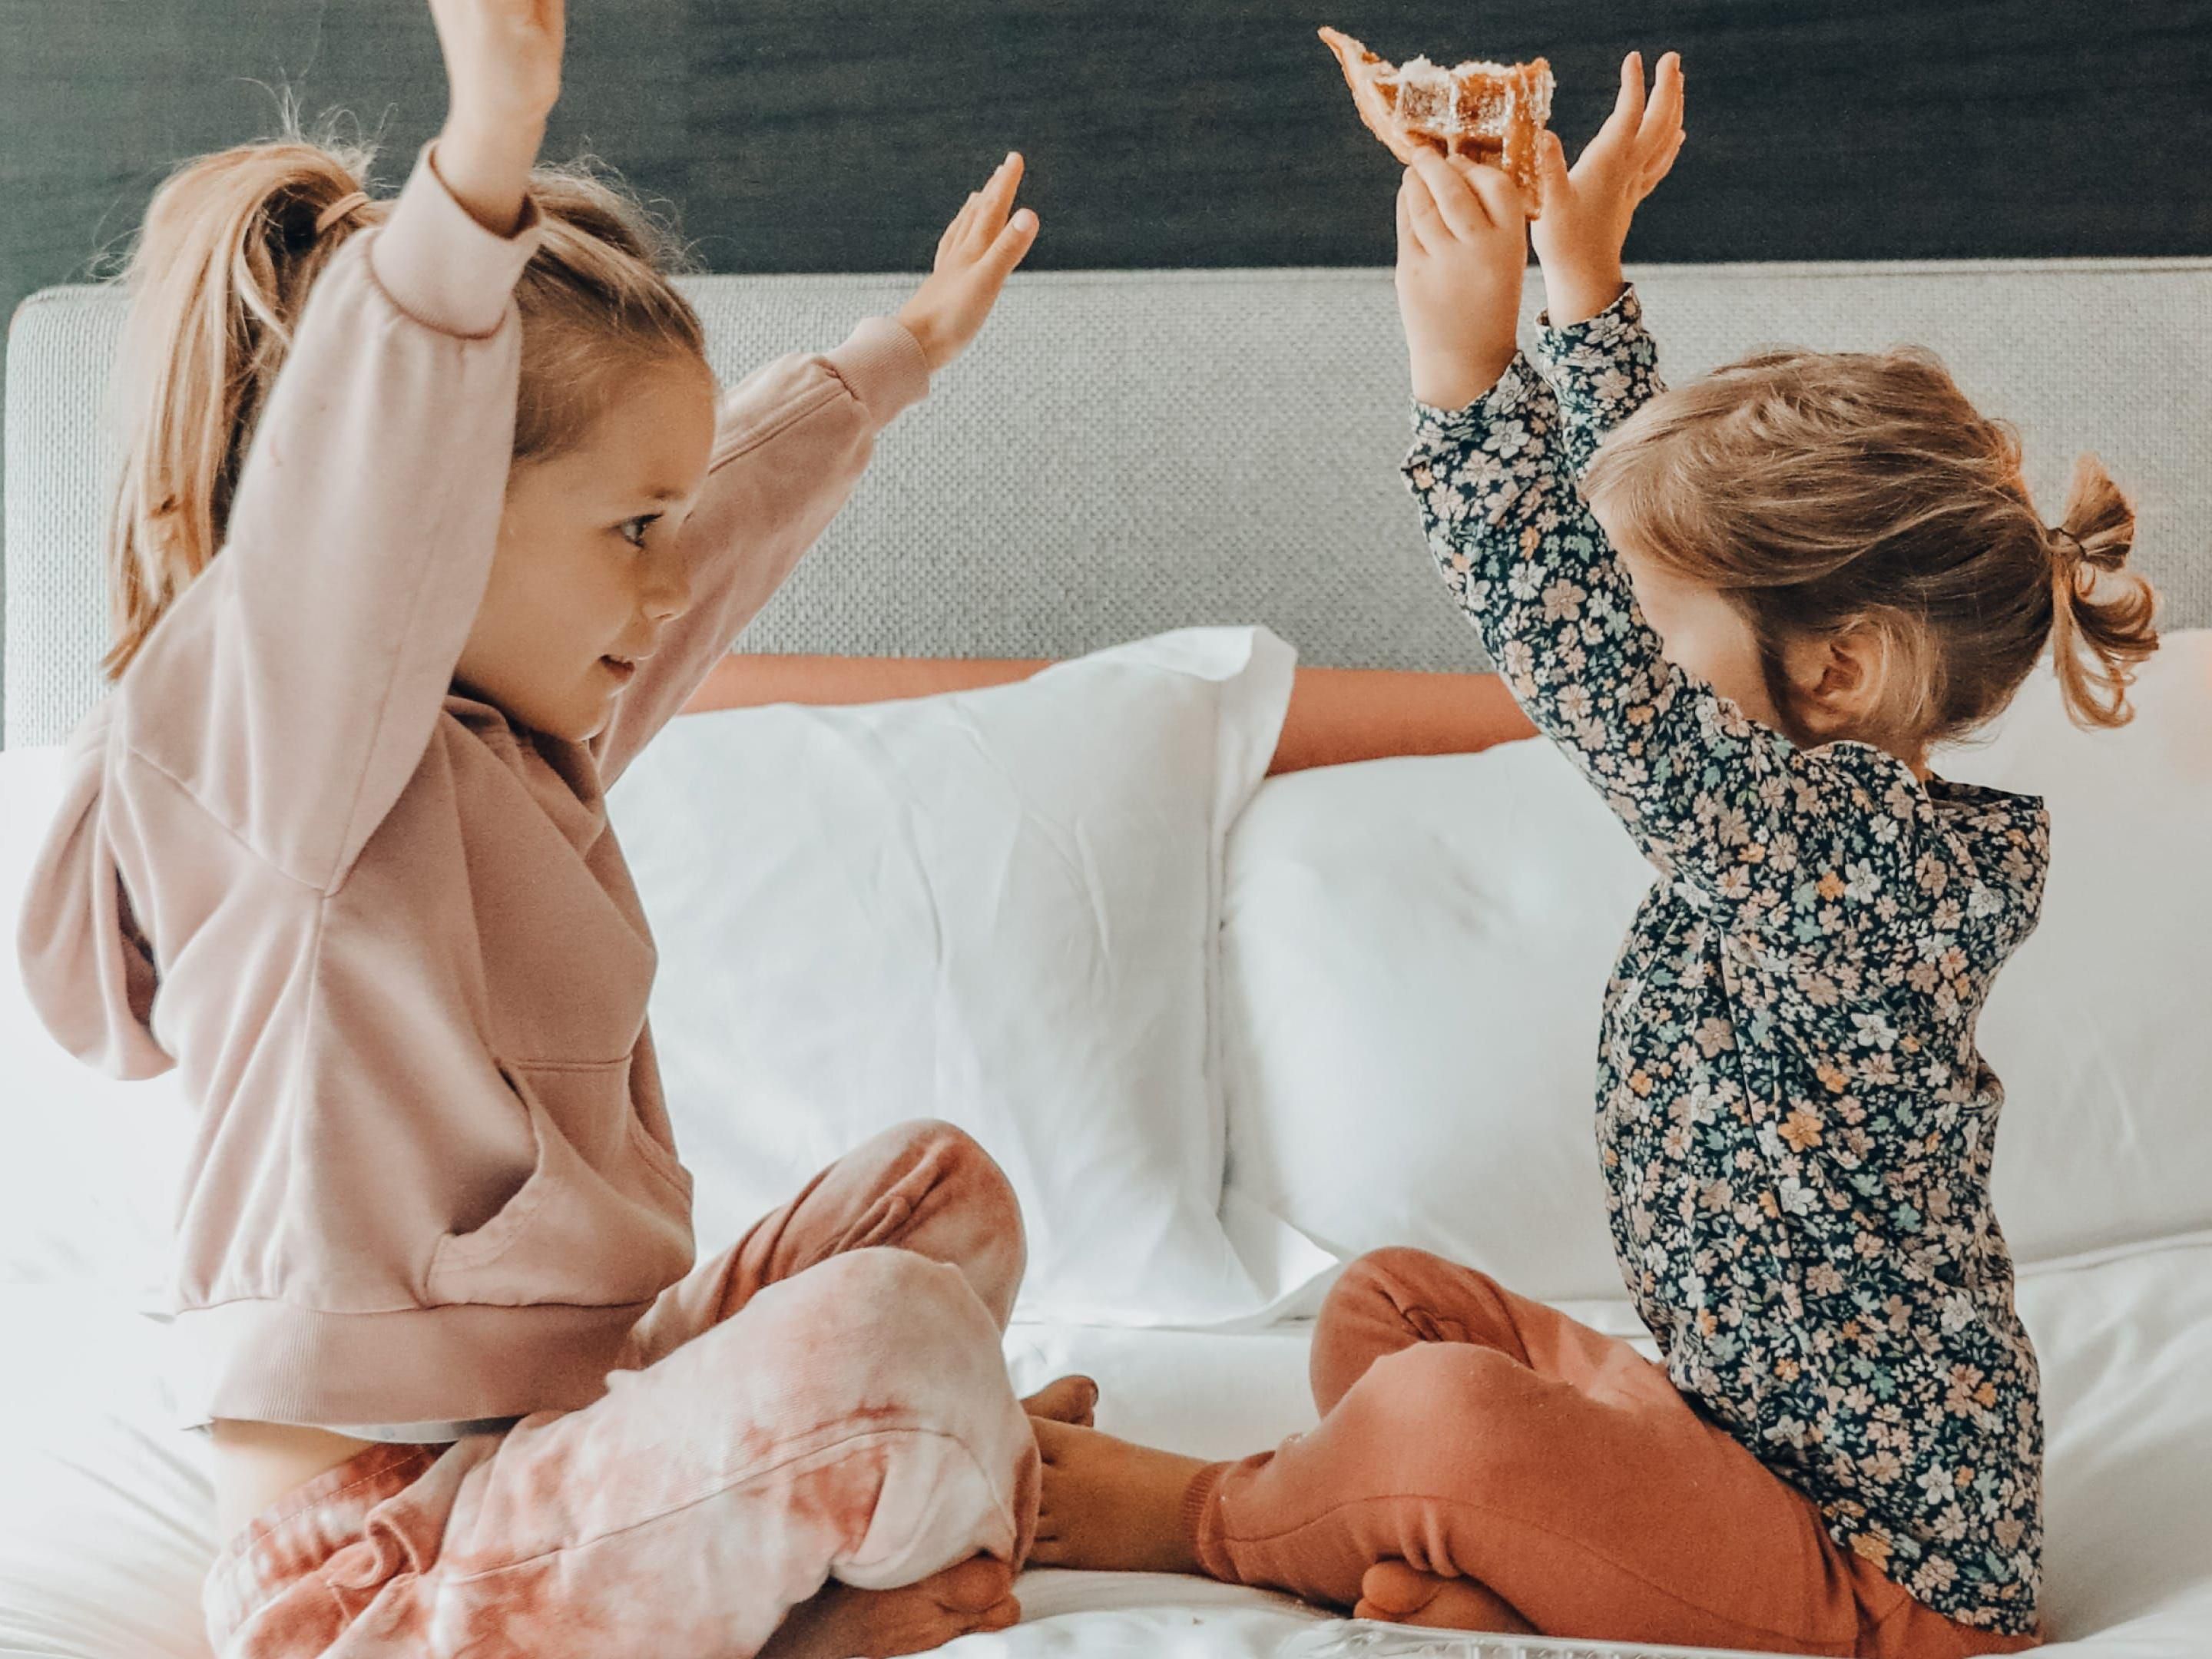 Enjoy our 50m² family rooms offering two connecting rooms with a queen bed and twin beds, each one equipped with a spacious bathroom and restroom.
These rooms are available solely for three to four guests including at least a child under 18 years old.